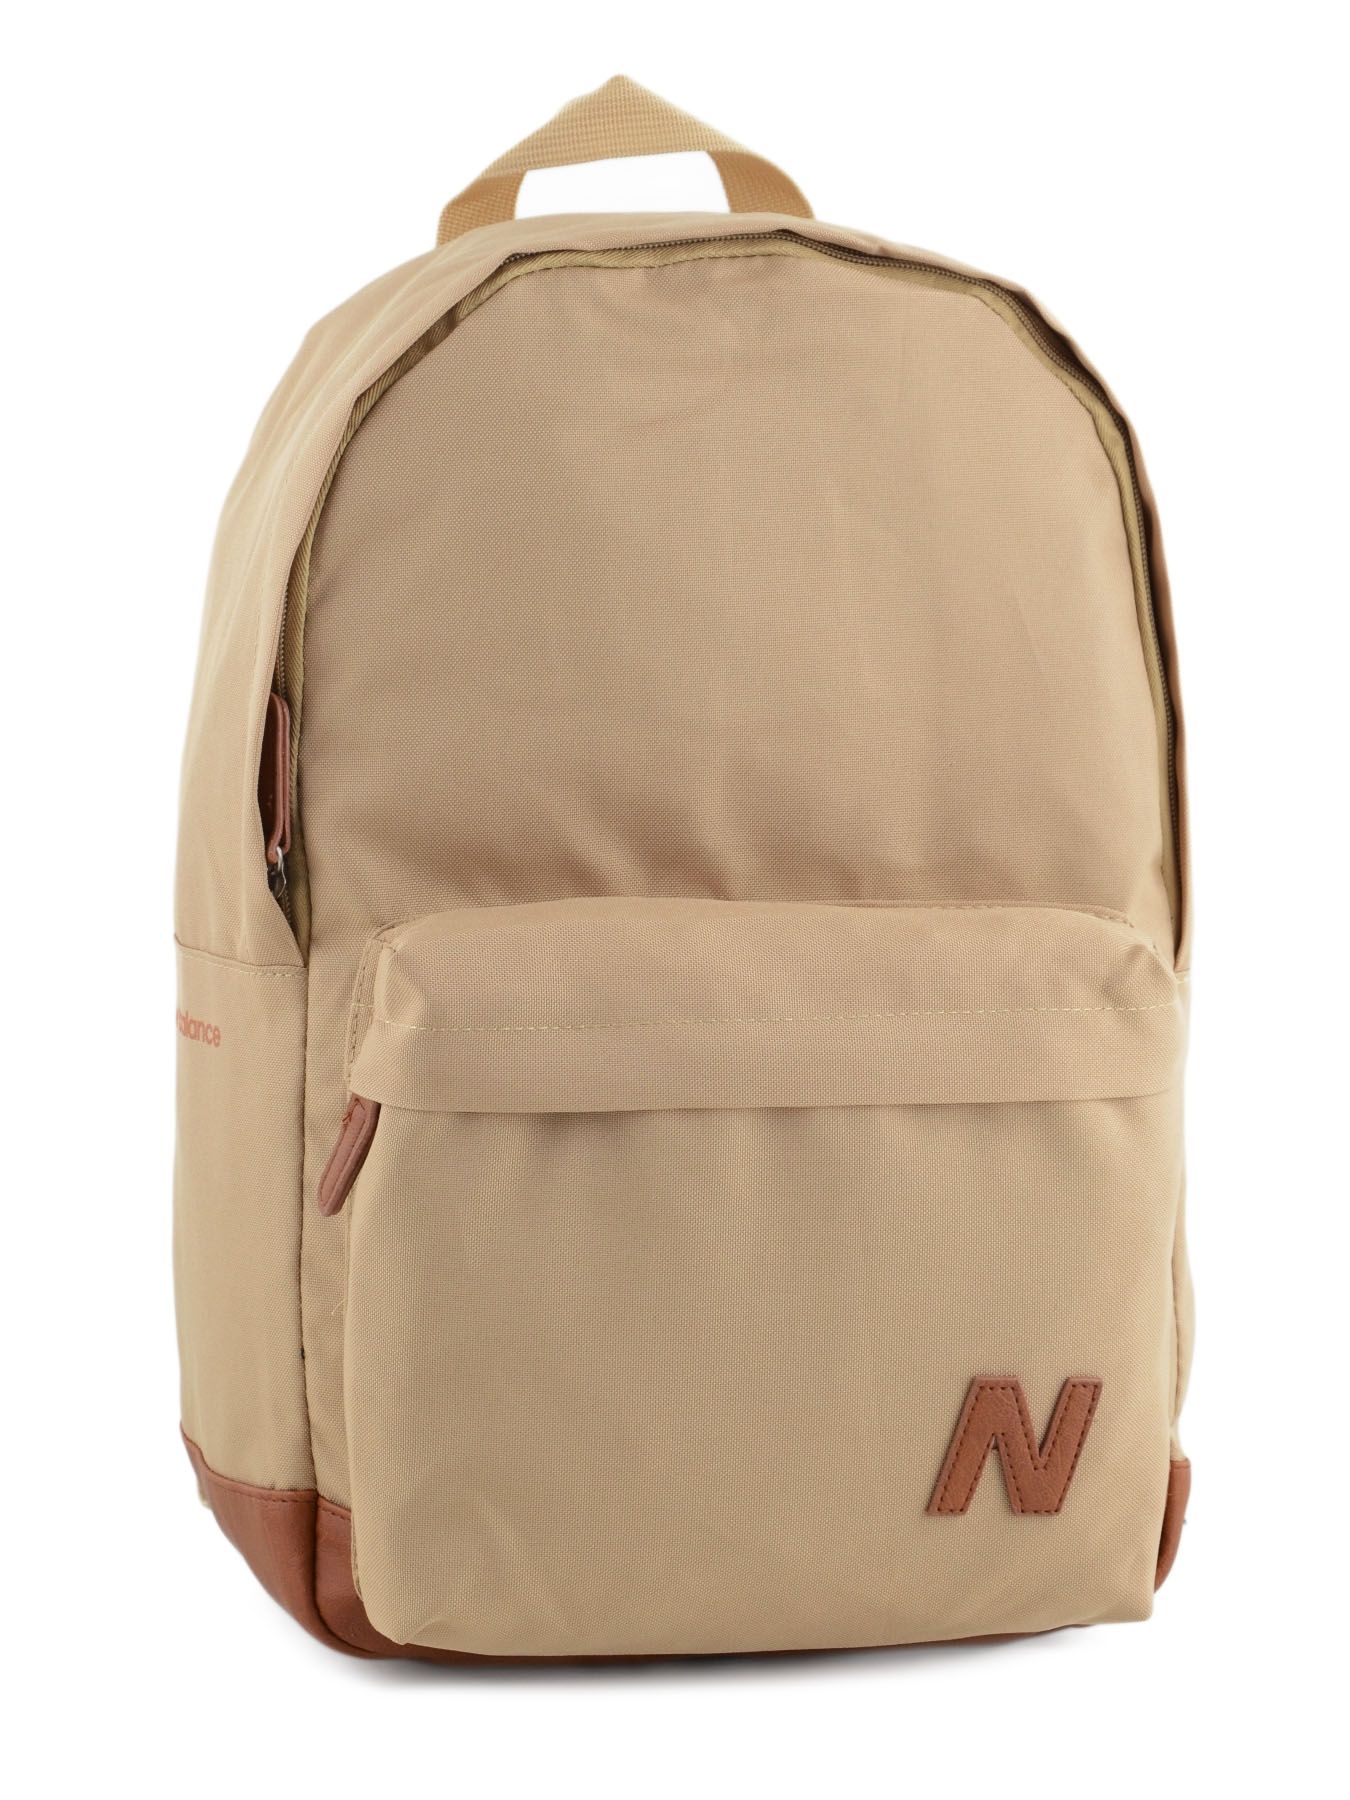 New Balance Backpack Ascent - Best prices